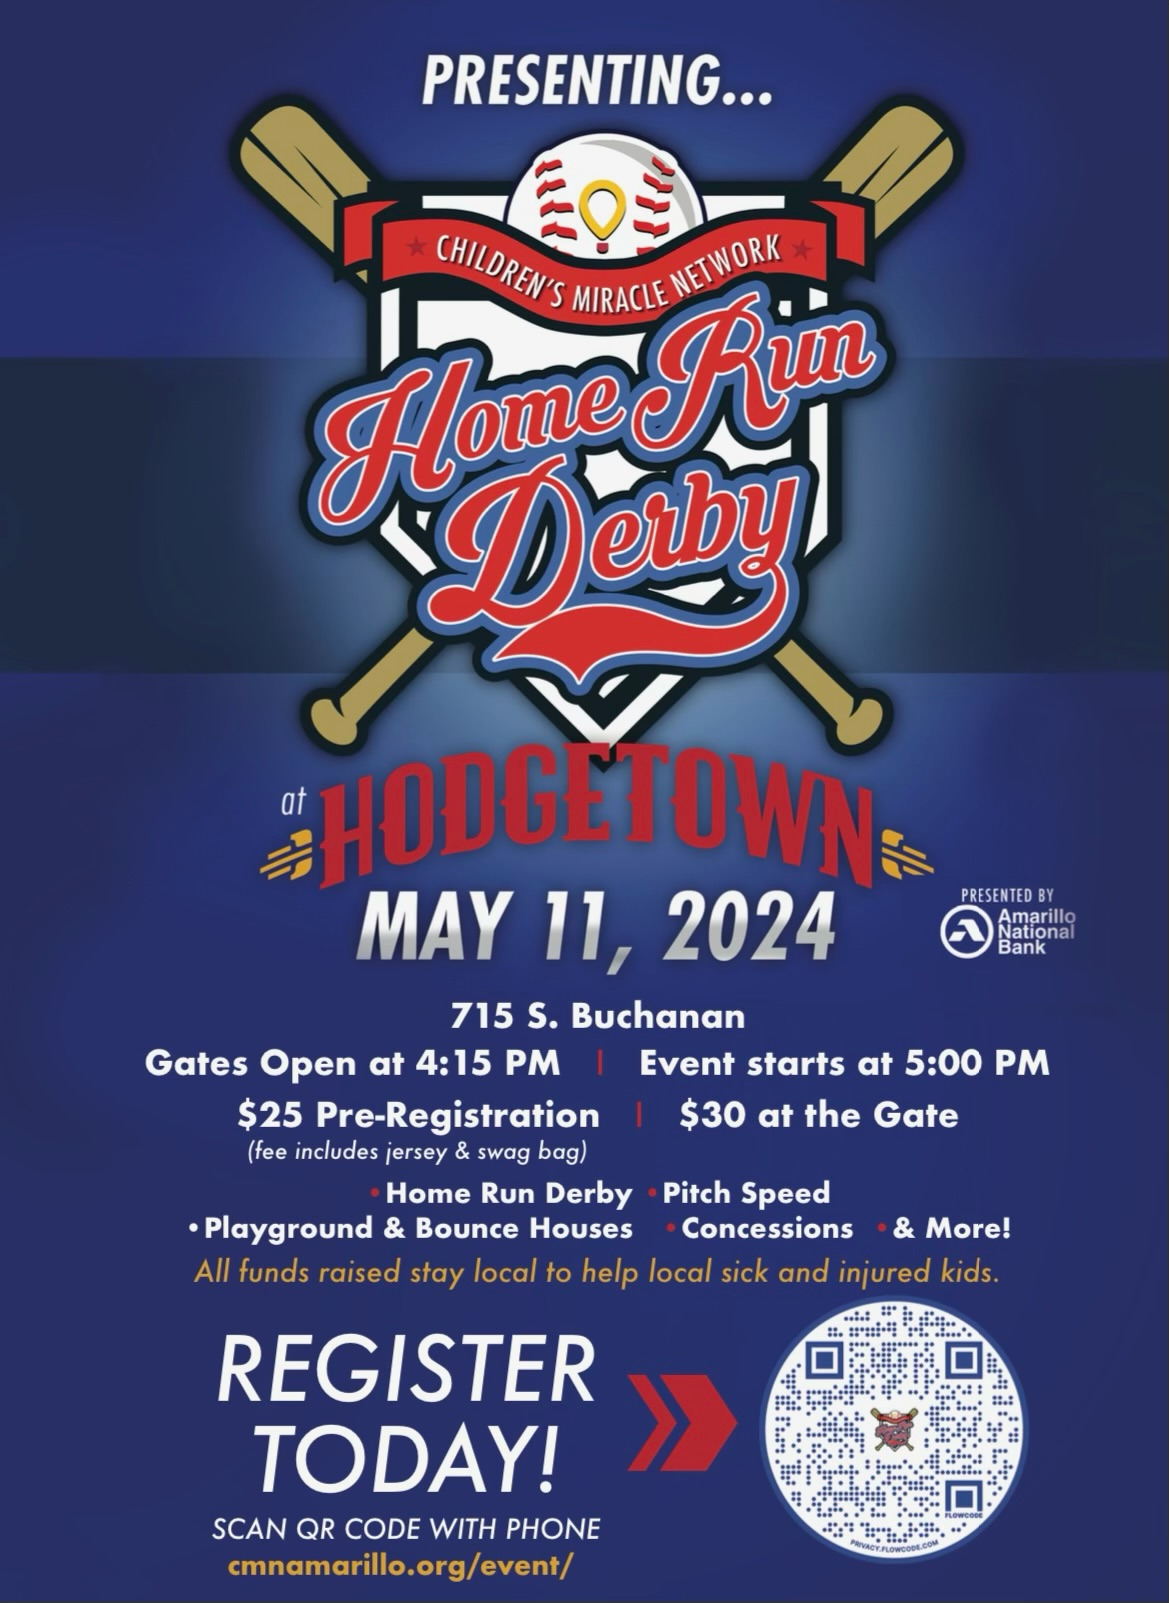 Childrens Miracle Network Home Run Derby